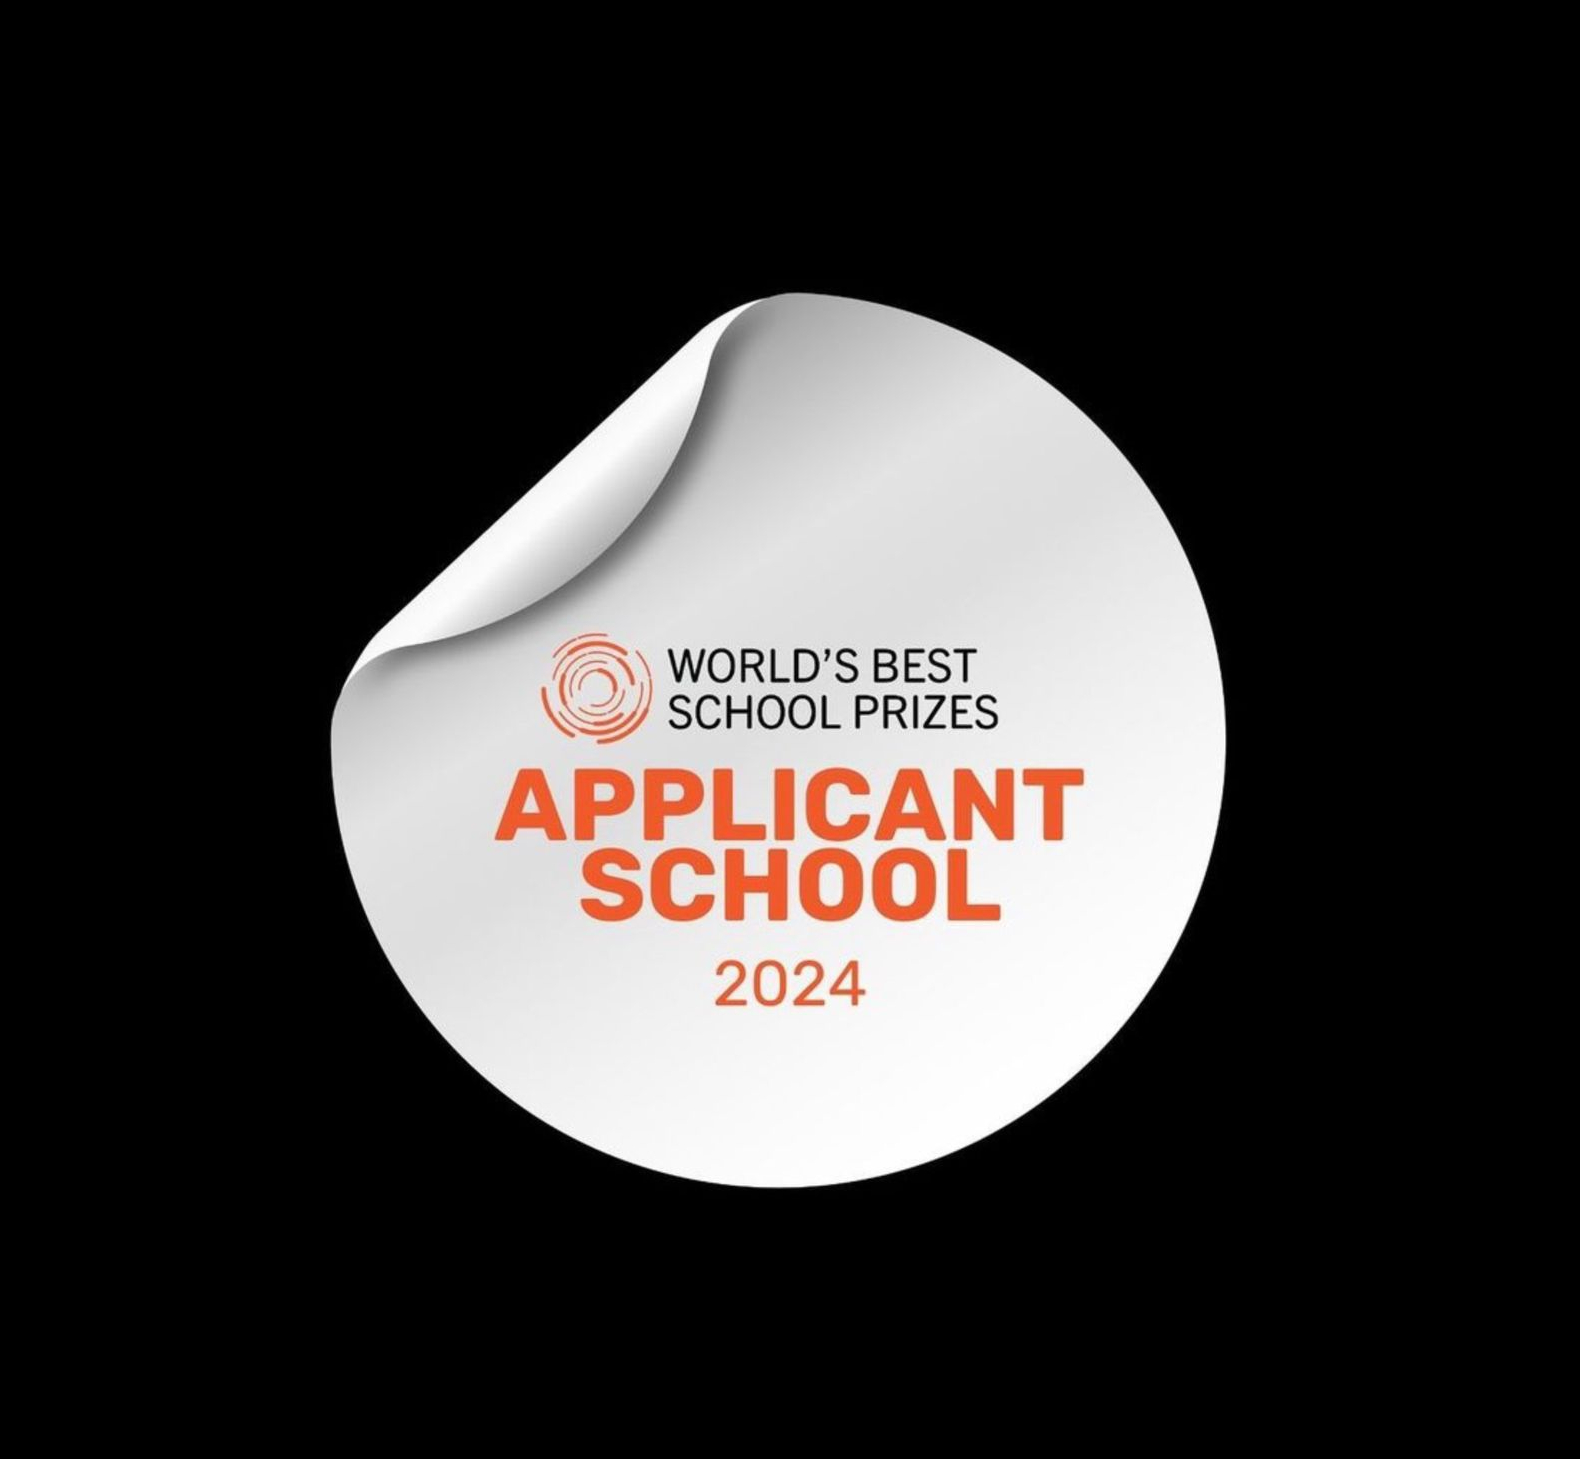 ETS as an Applicant for the Prestigious World's Best School Prizes 2024!